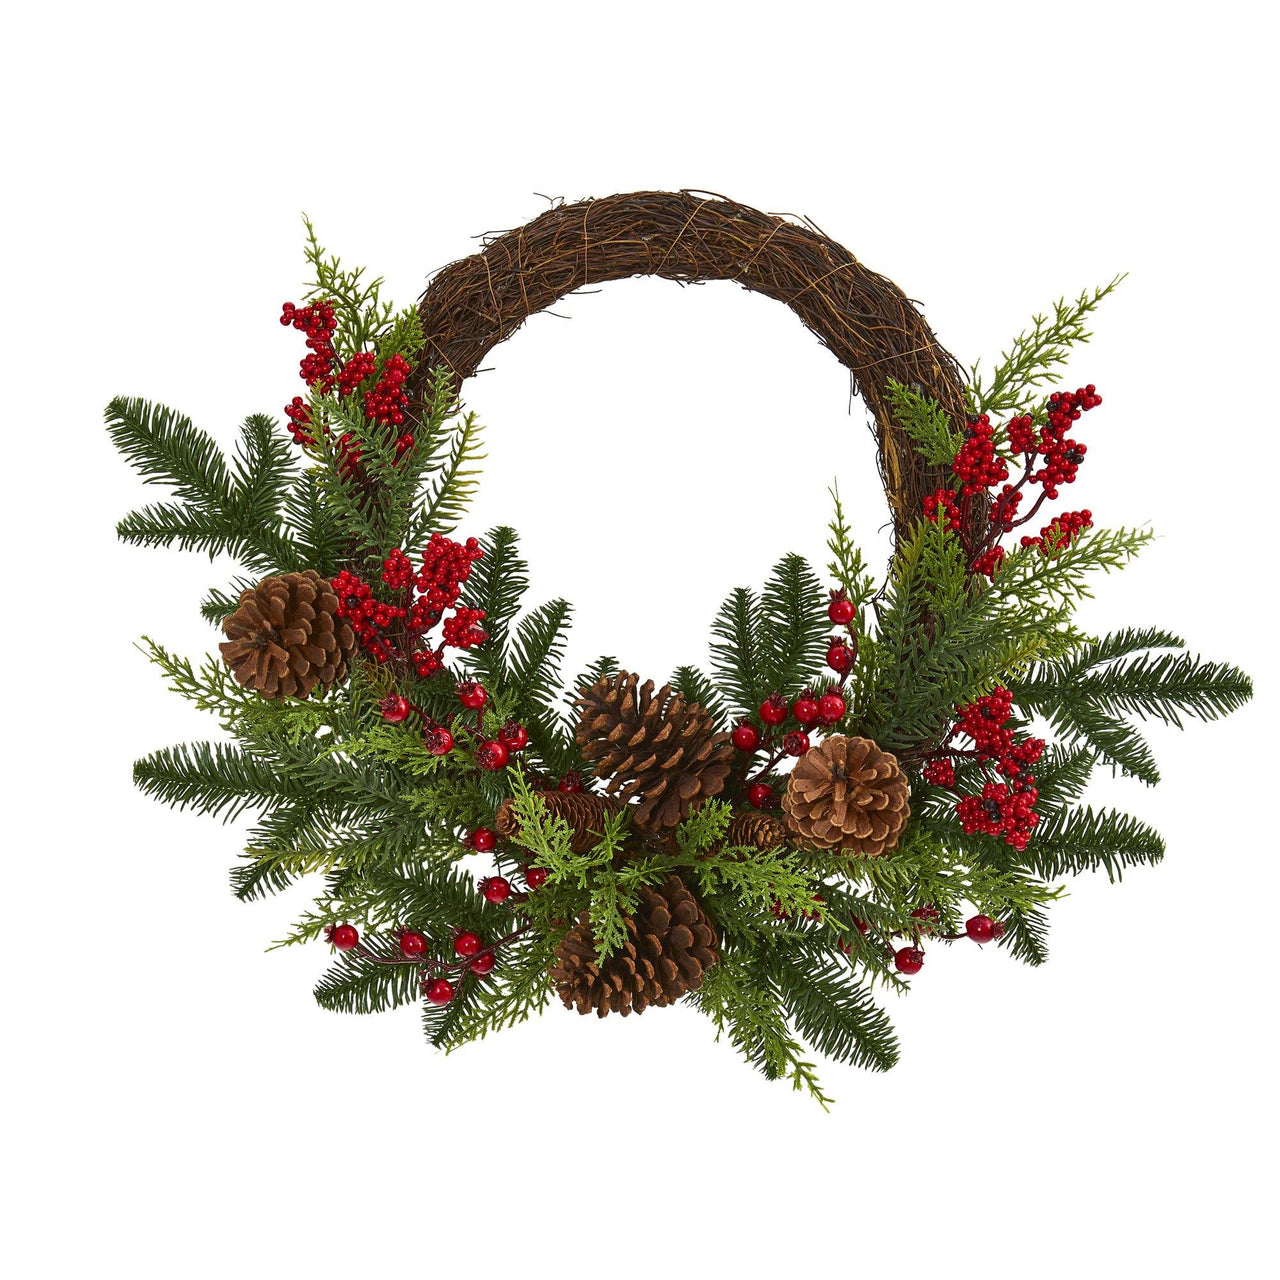 22” Mixed Pine and Cedar with Berries and Pine Cones Artificial Wreath 